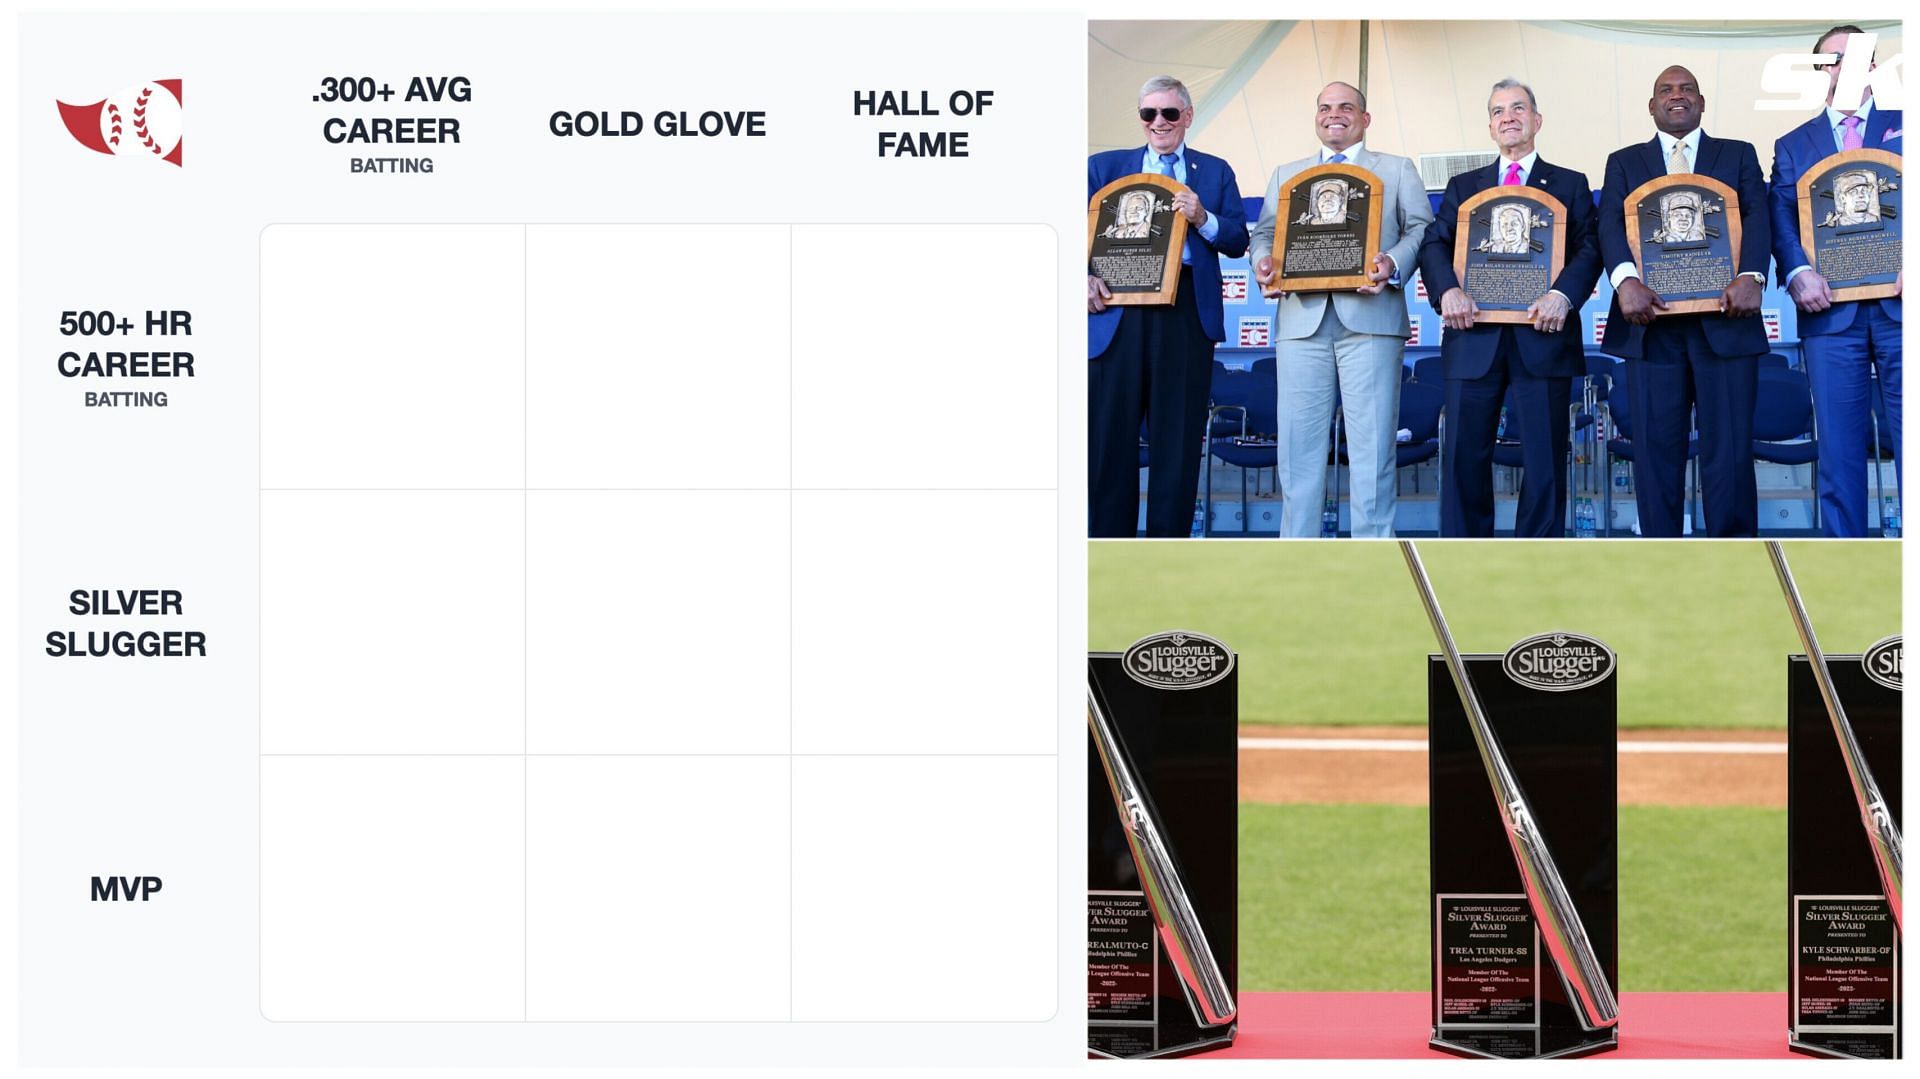 MLB Immaculate Grid August 5 answers Hall of Famers to have won the Silver Slugger award